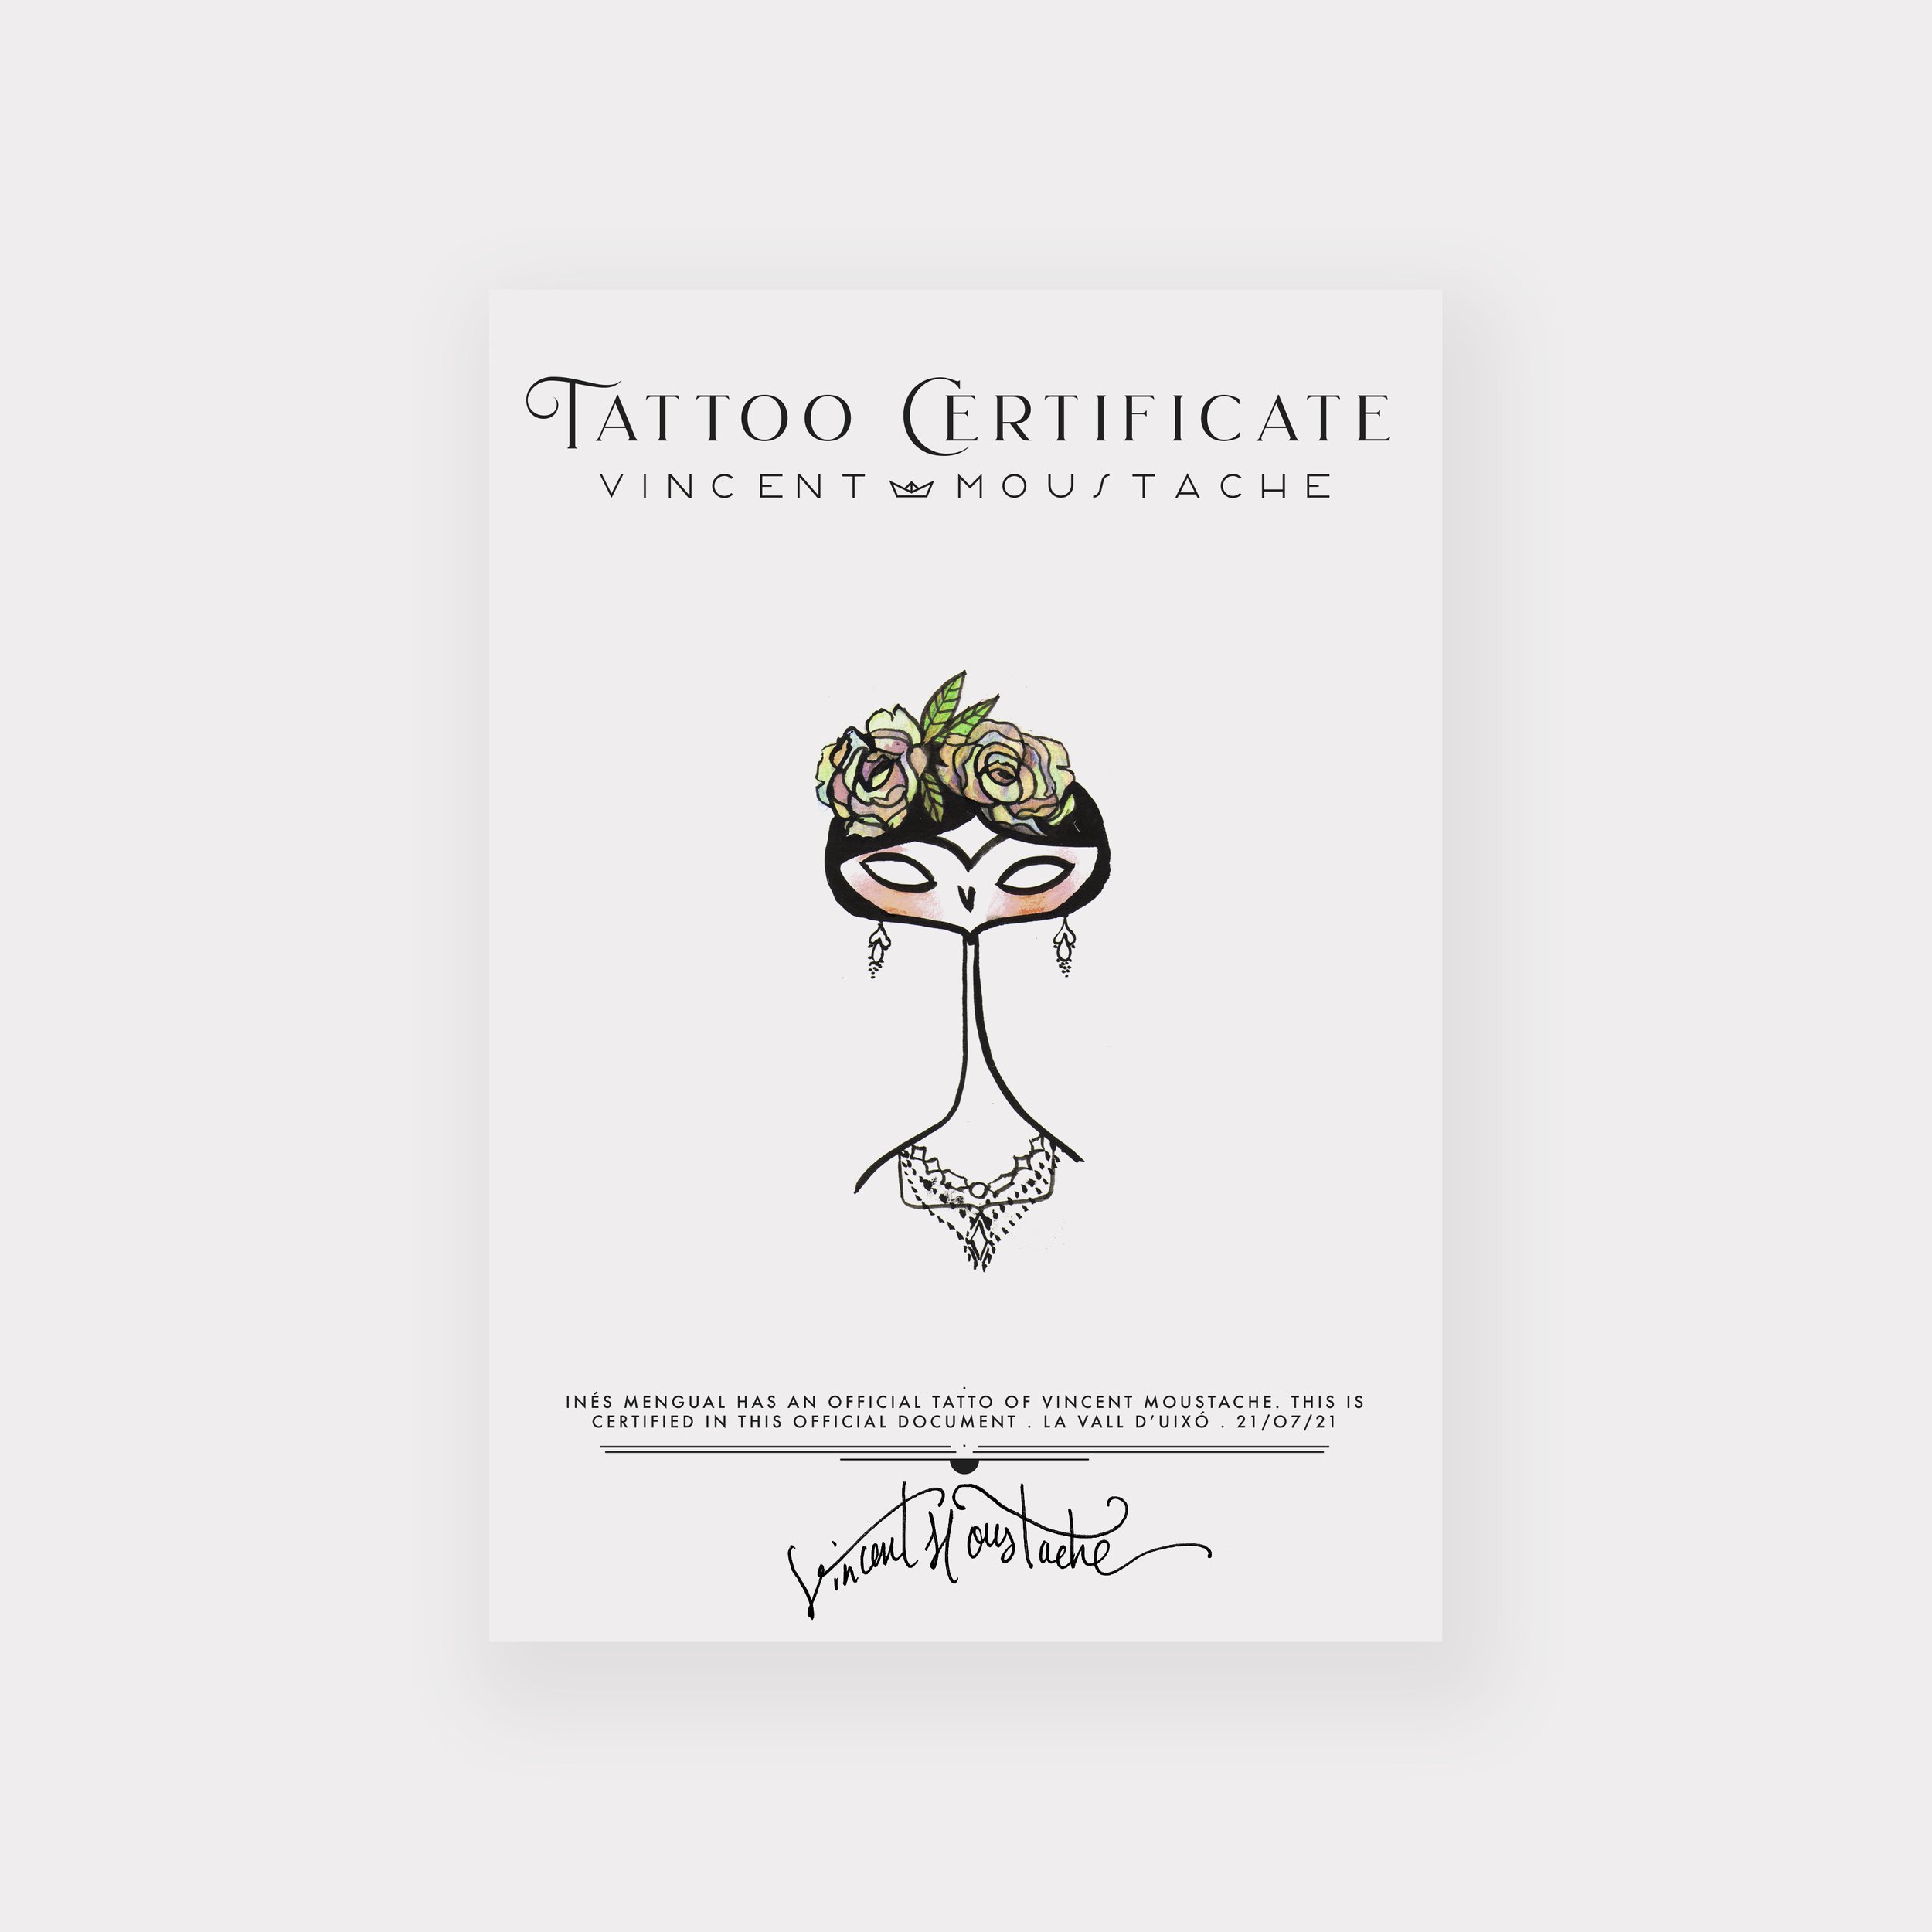 Christmas Tattoo Gift Certificate. Tattoo Ticket. Tattoo Gift Card. Tattoo  Voucher. Tattoo Certificate. Tattoo Coupon. Editable Ticket. - Etsy